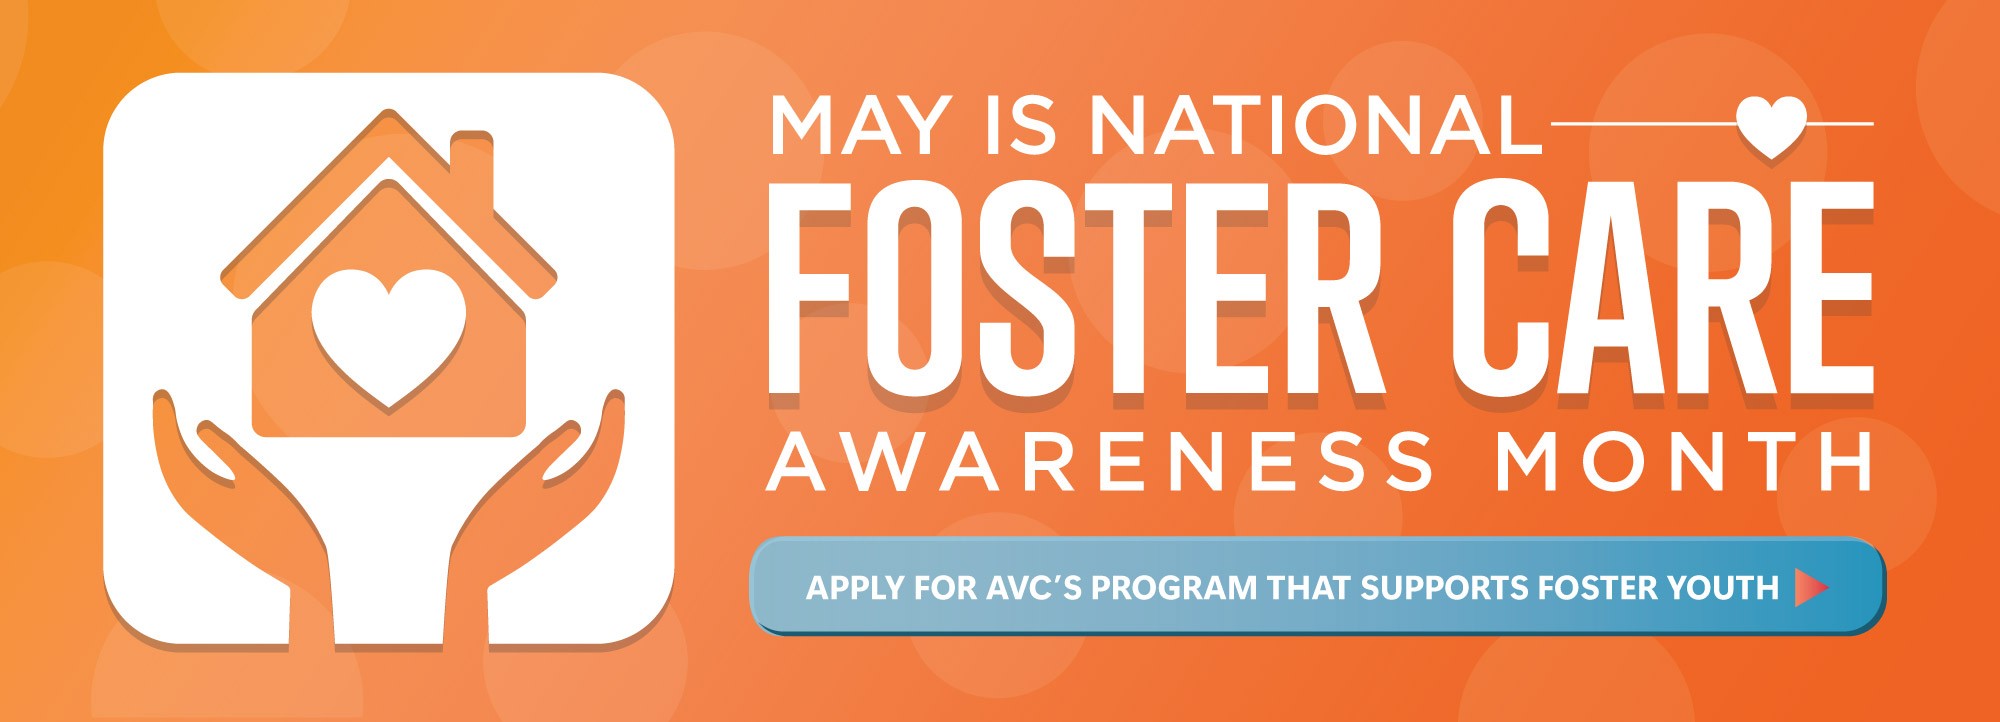 May is National Foster Care Awareness Month